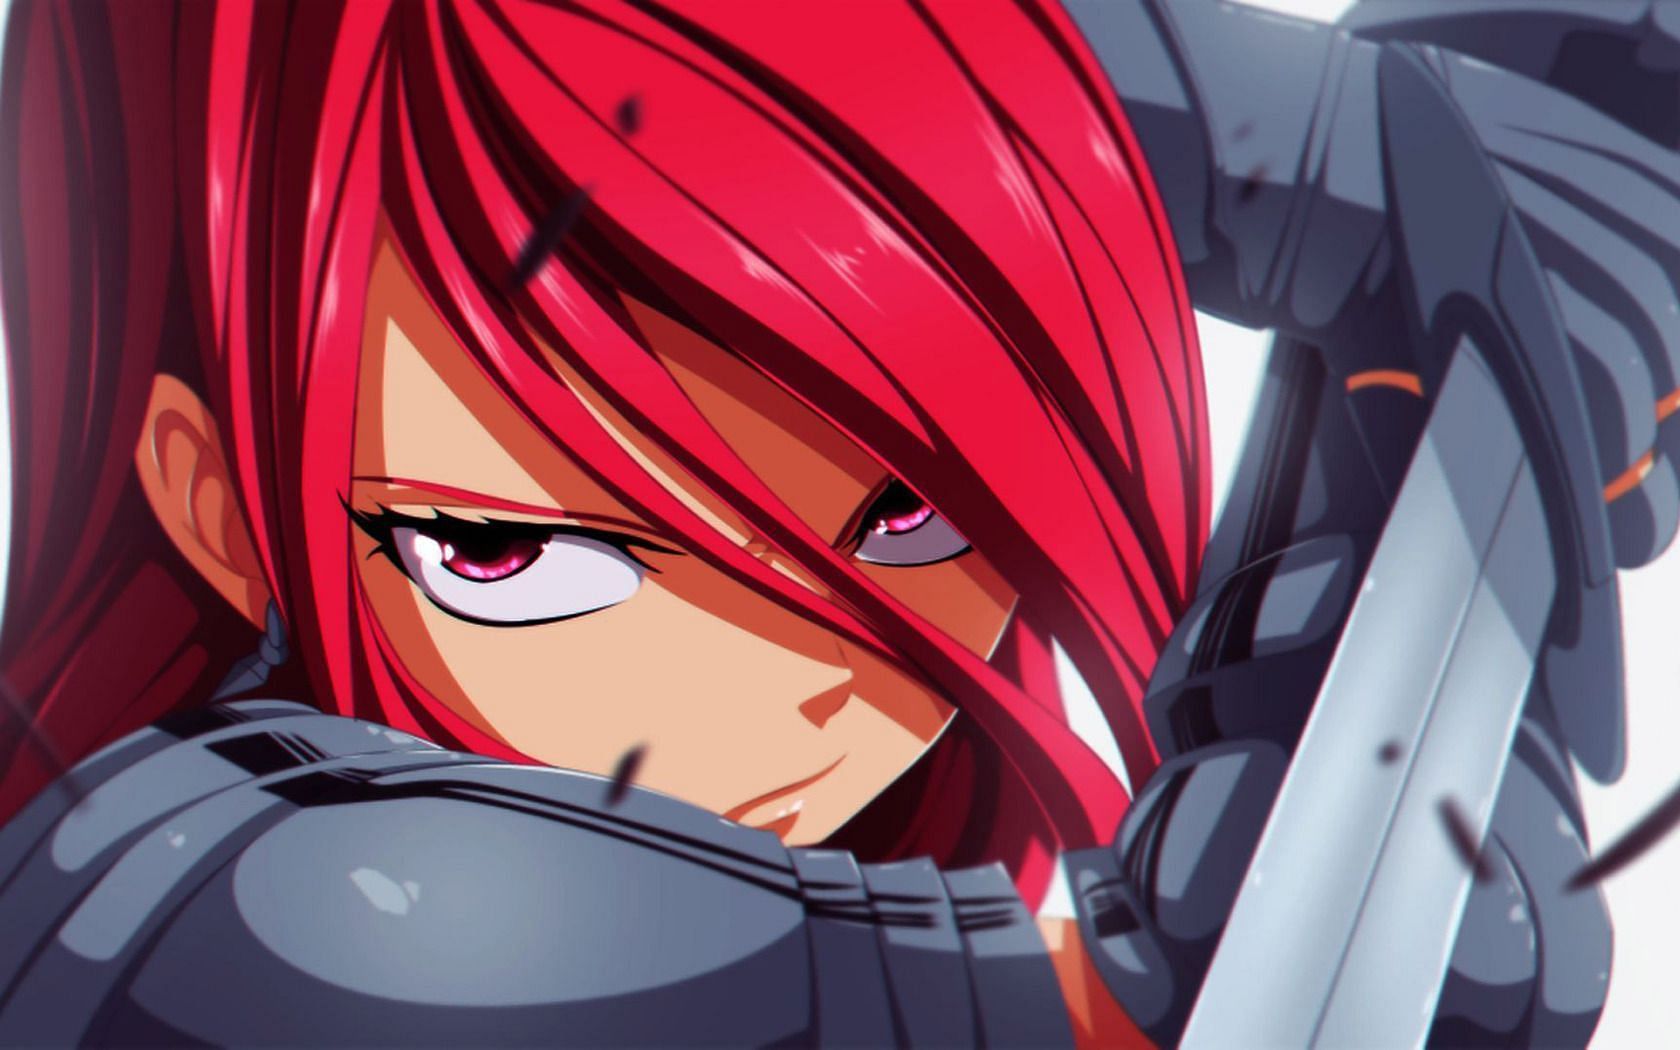 Erza Scarlet, as seen in Fairy Tail (Image via A1 Pictures Studio)